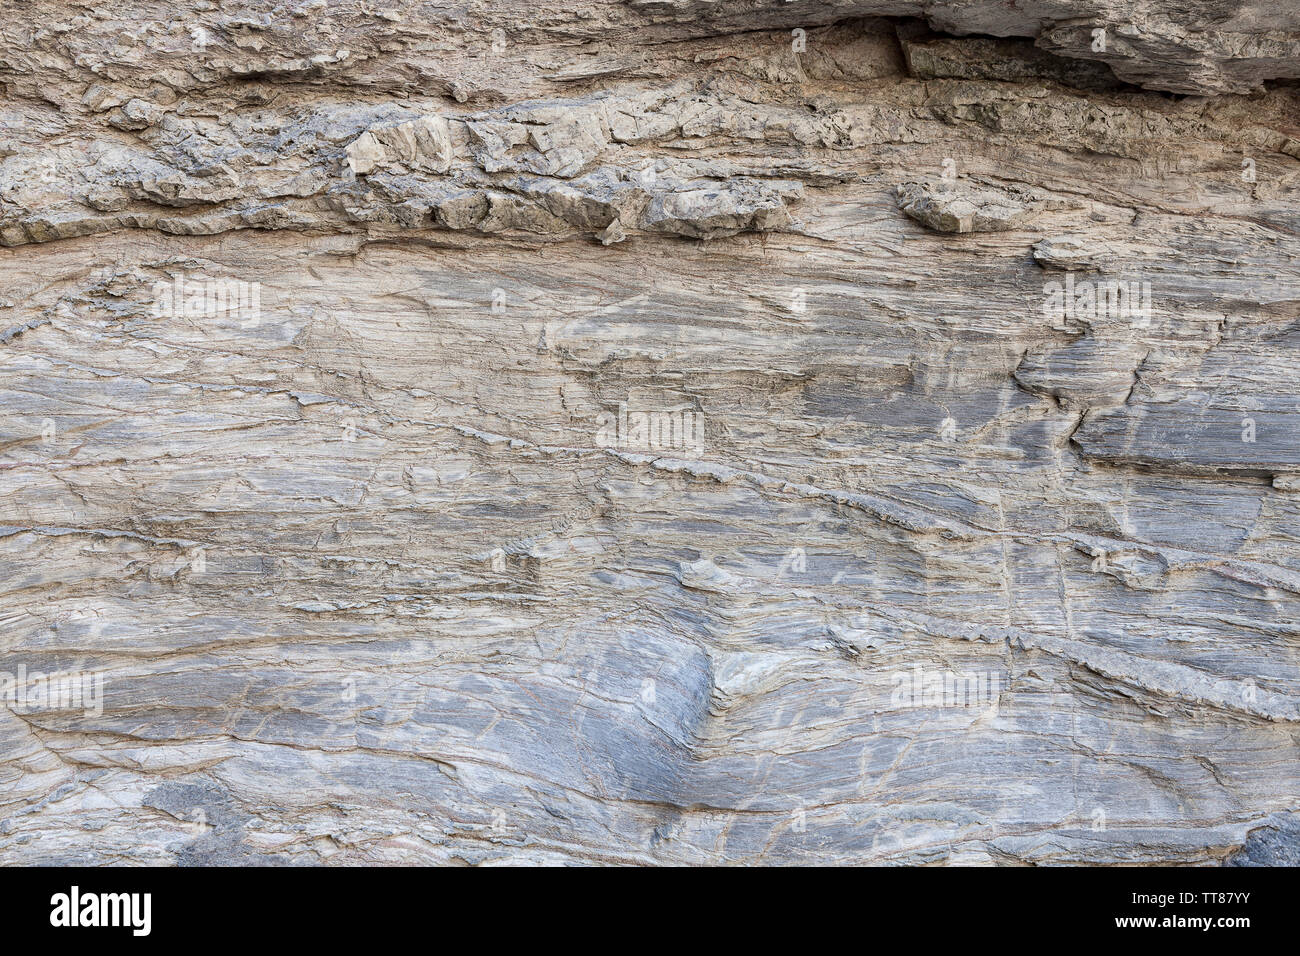 Natural texture of the rock surface, where you can see the lines drawn in the long rock of time. Can be used as background. Stock Photo